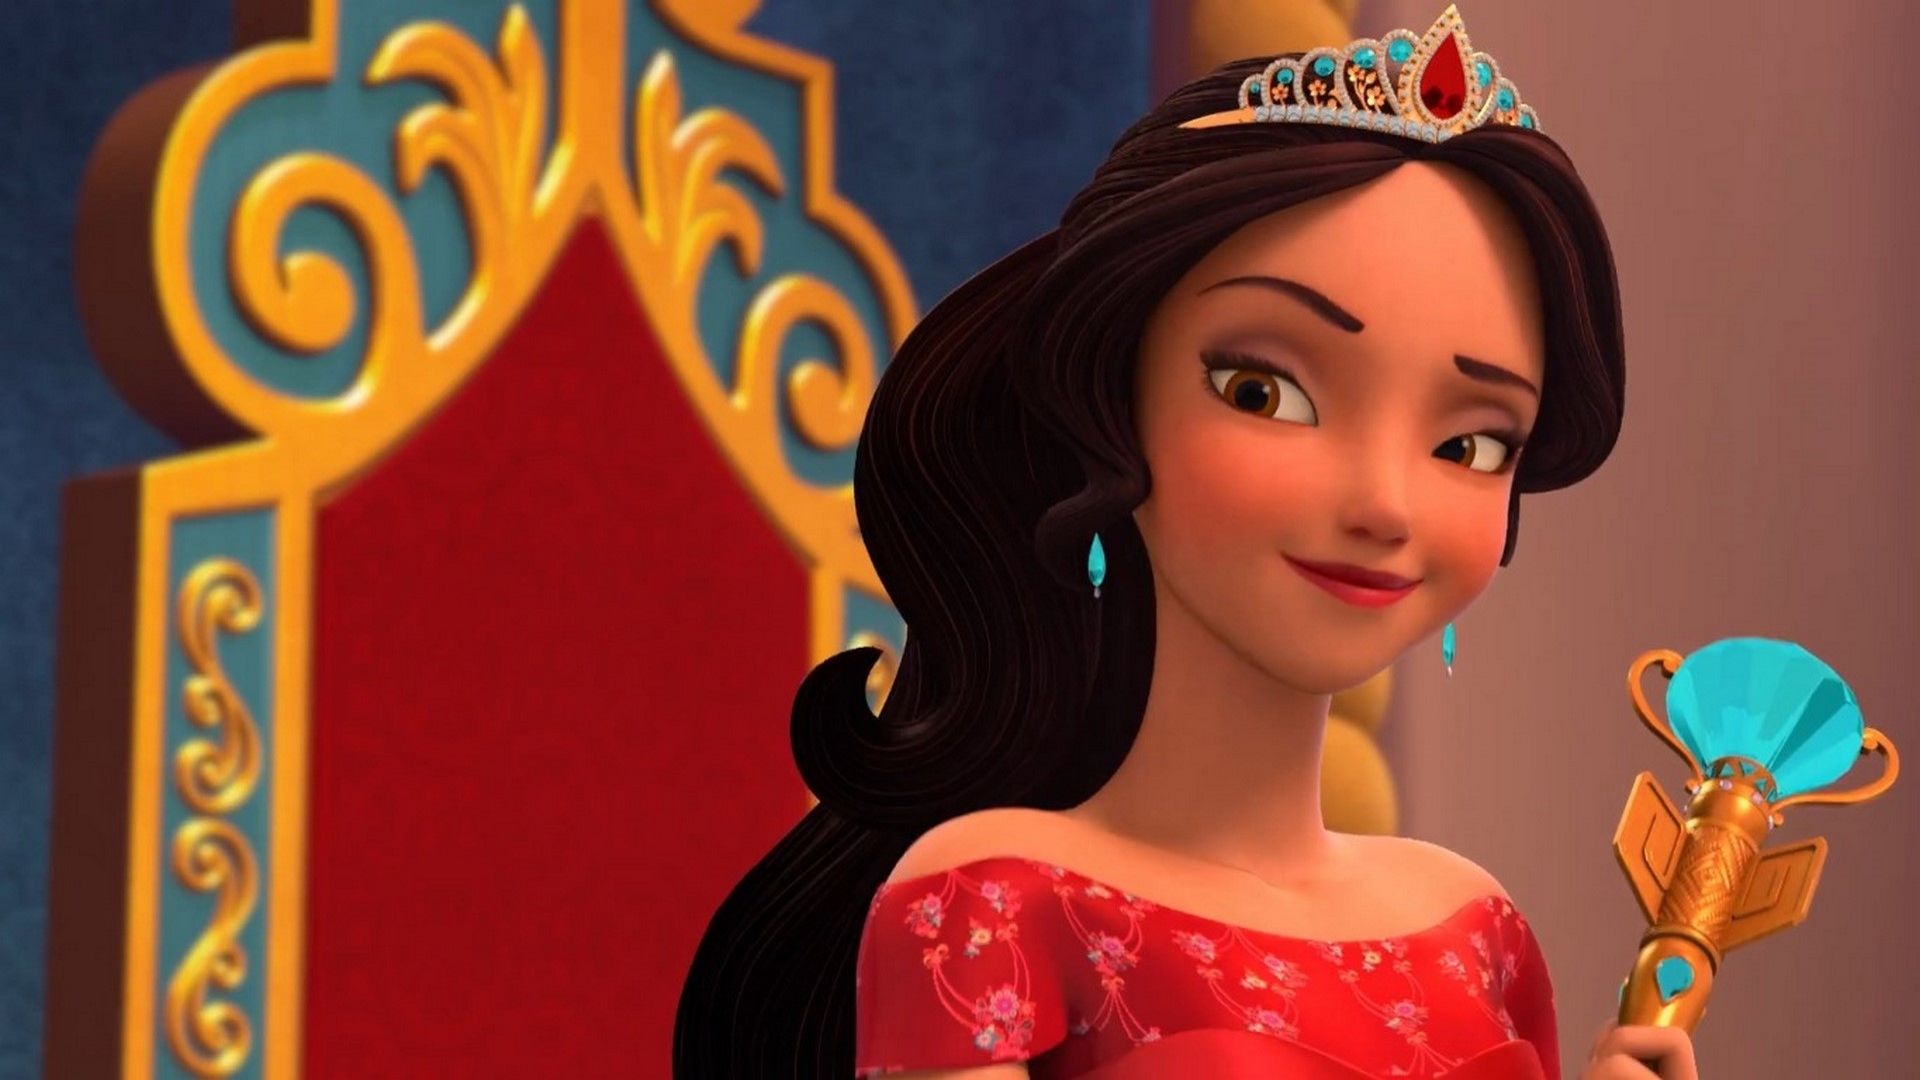 REVIEW 'Elena and the Secret of Avalor' DVD Release. Disney